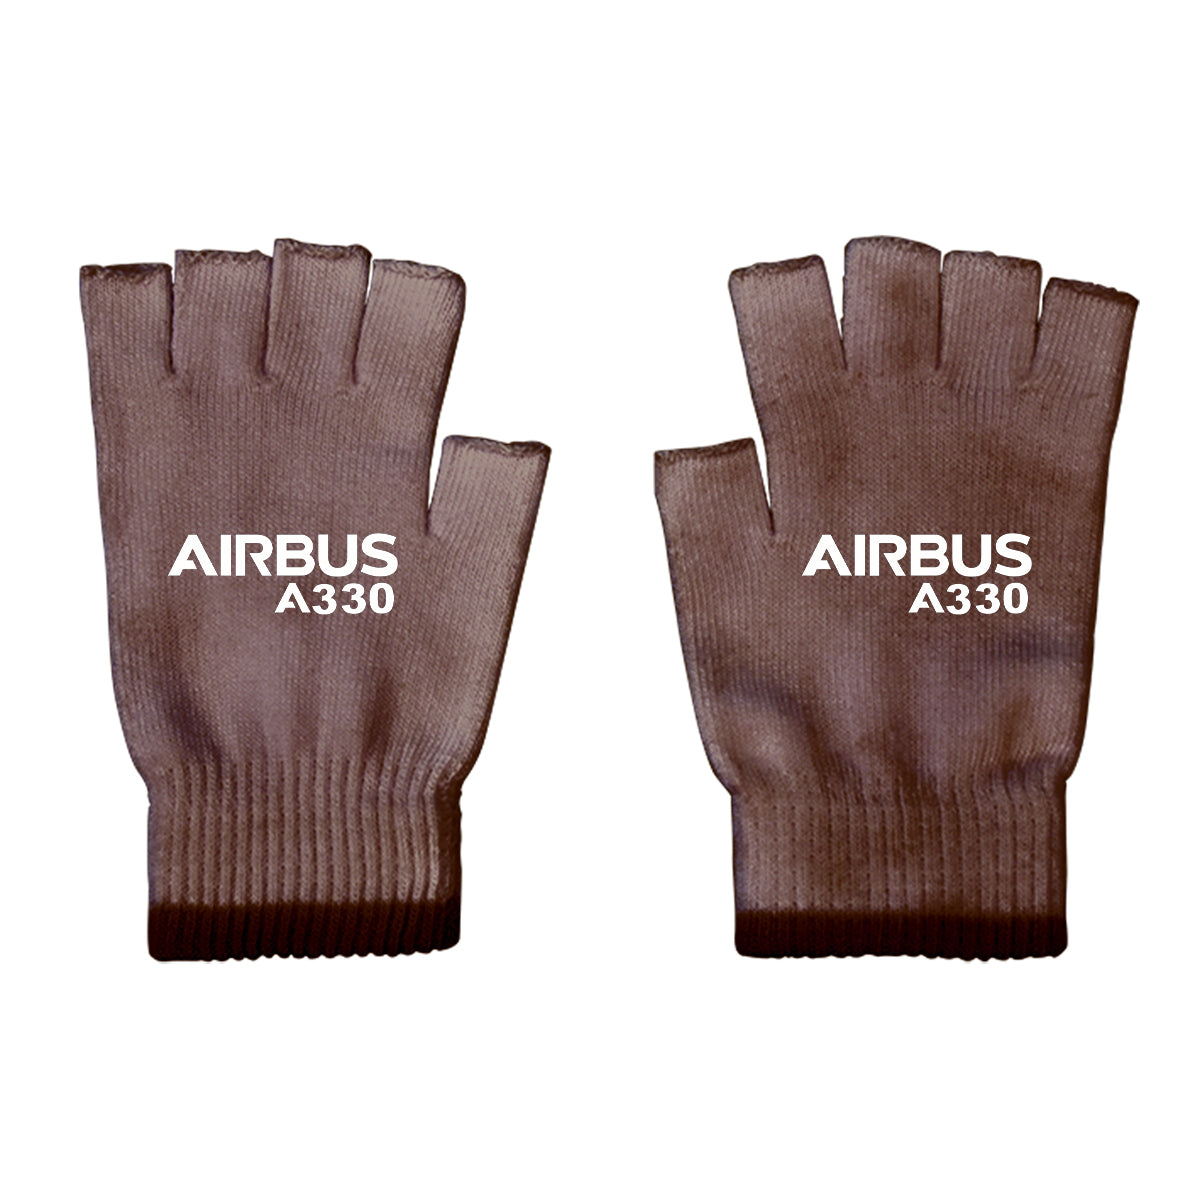 Airbus A330 & Text Designed Cut Gloves